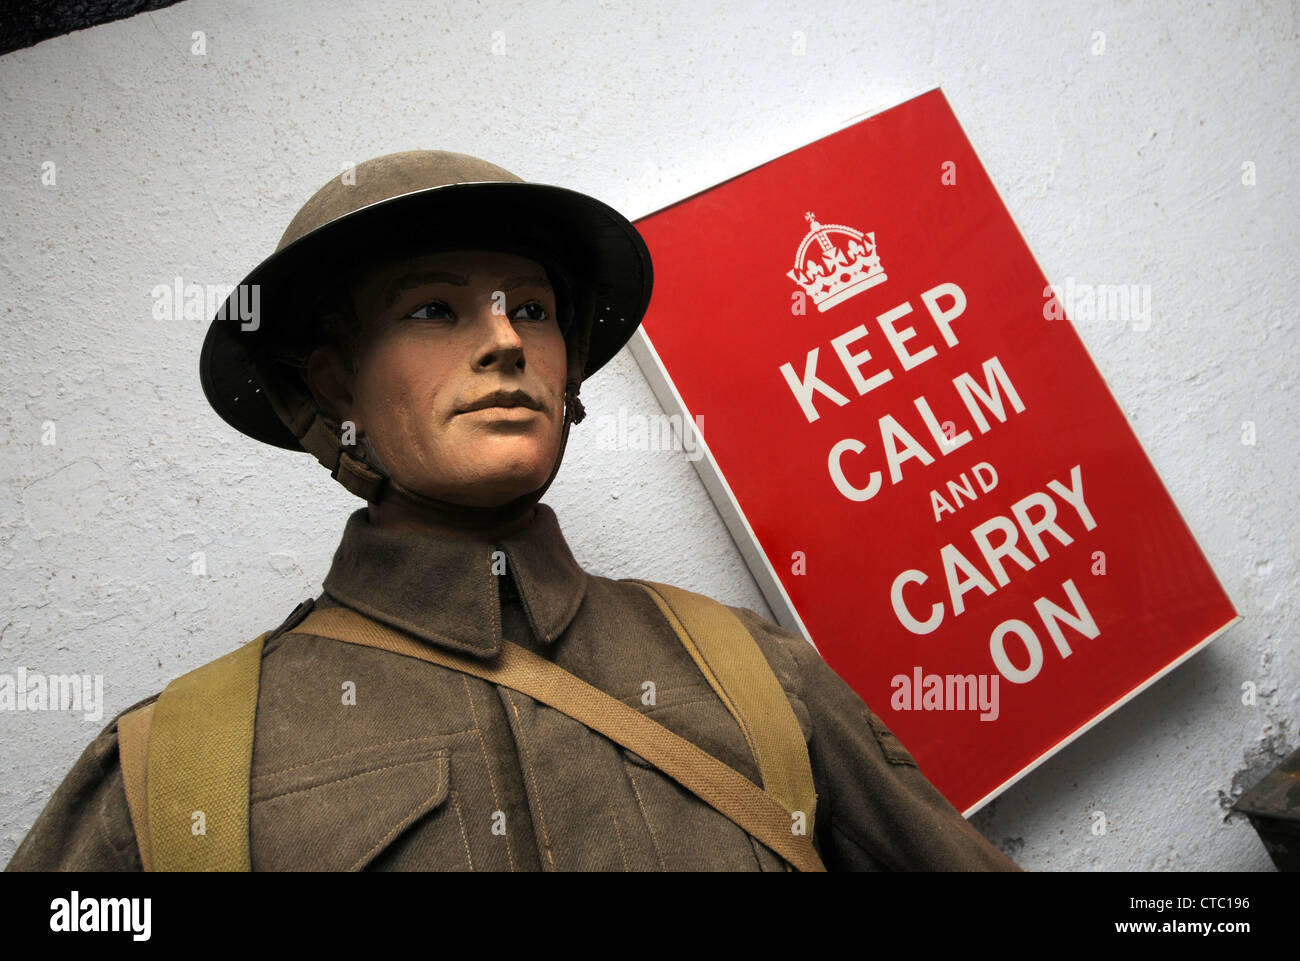 Keep Calm and Carry On poster by a model of a British soldier Stock Photo